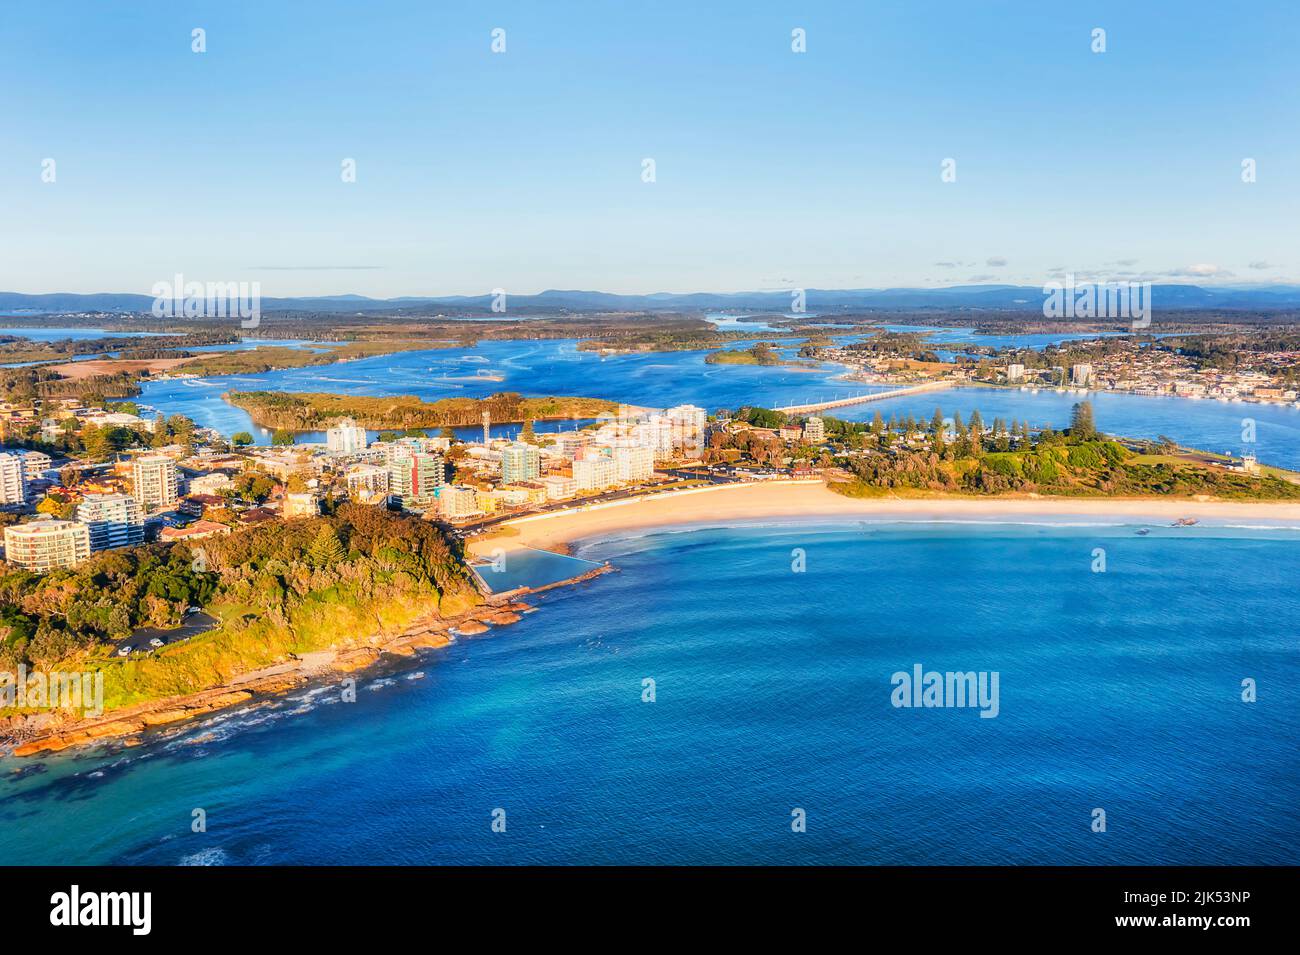 Main Forster beach on Pacific coast of Forster town in Australia - scenic aerial view to downtown from open sea and Wallis lake with bridge. Stock Photo